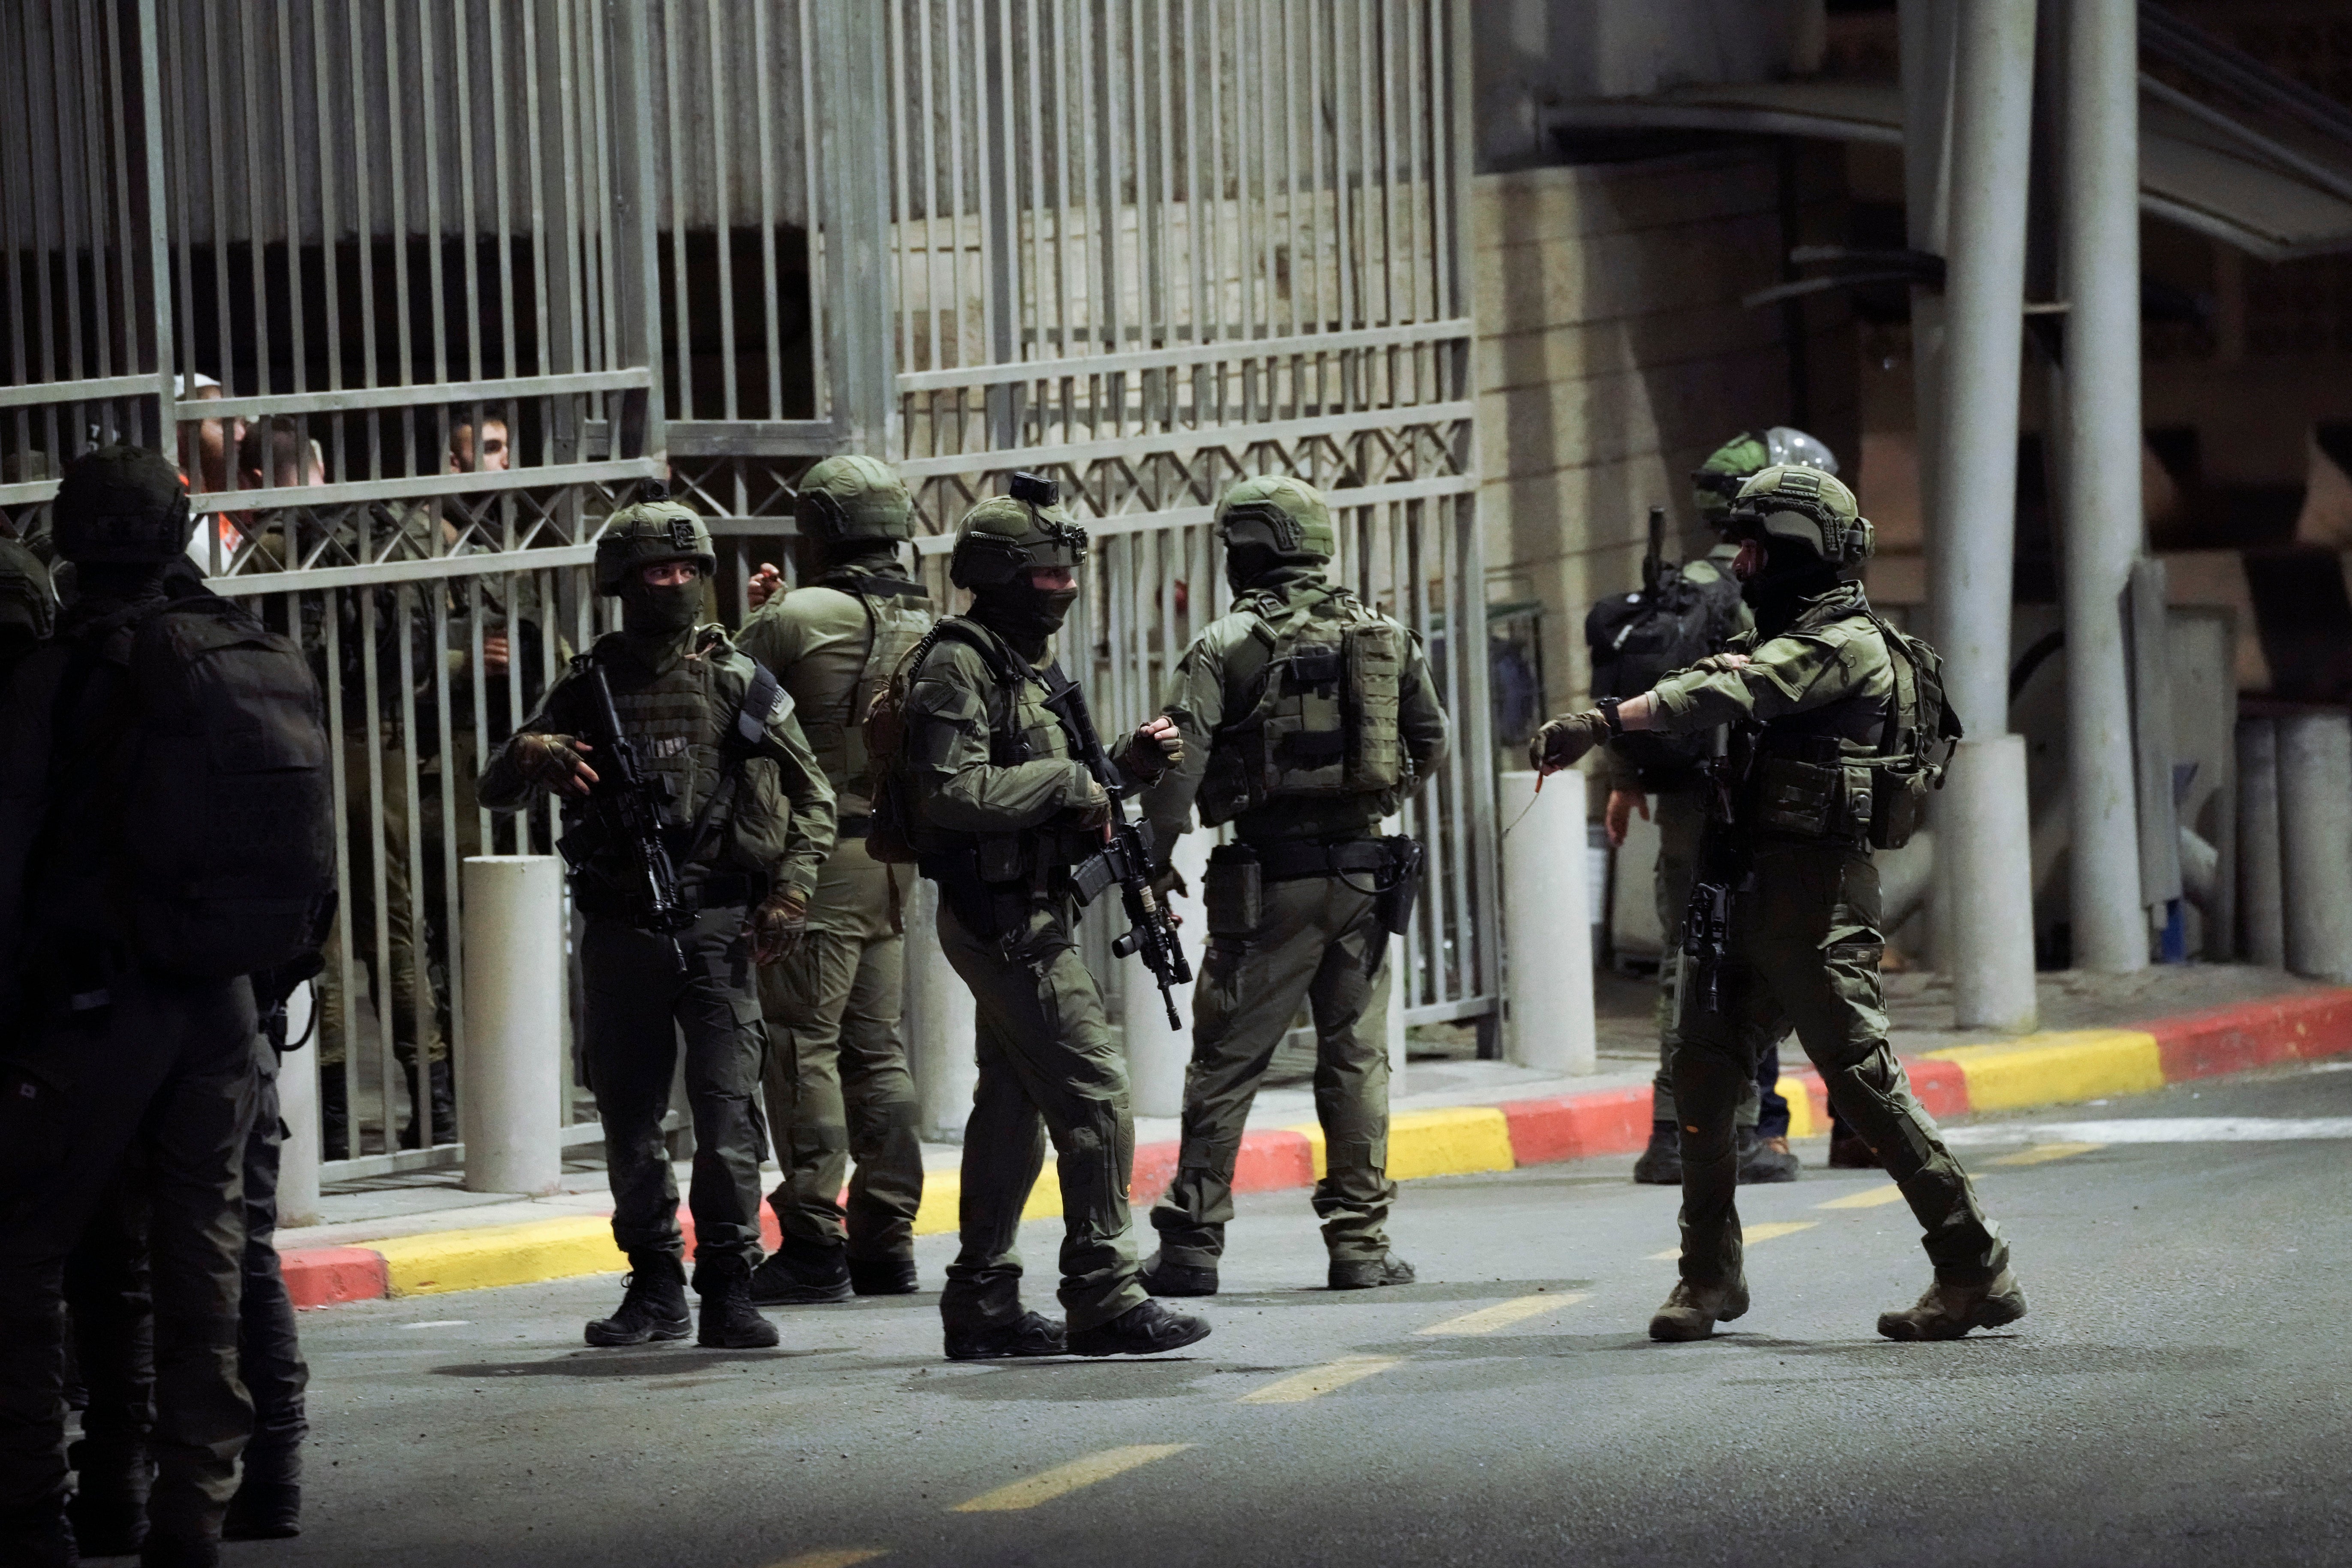 3 Palestinians arrested following deadly attack on Israeli security checkpoint, manhunt ongoing